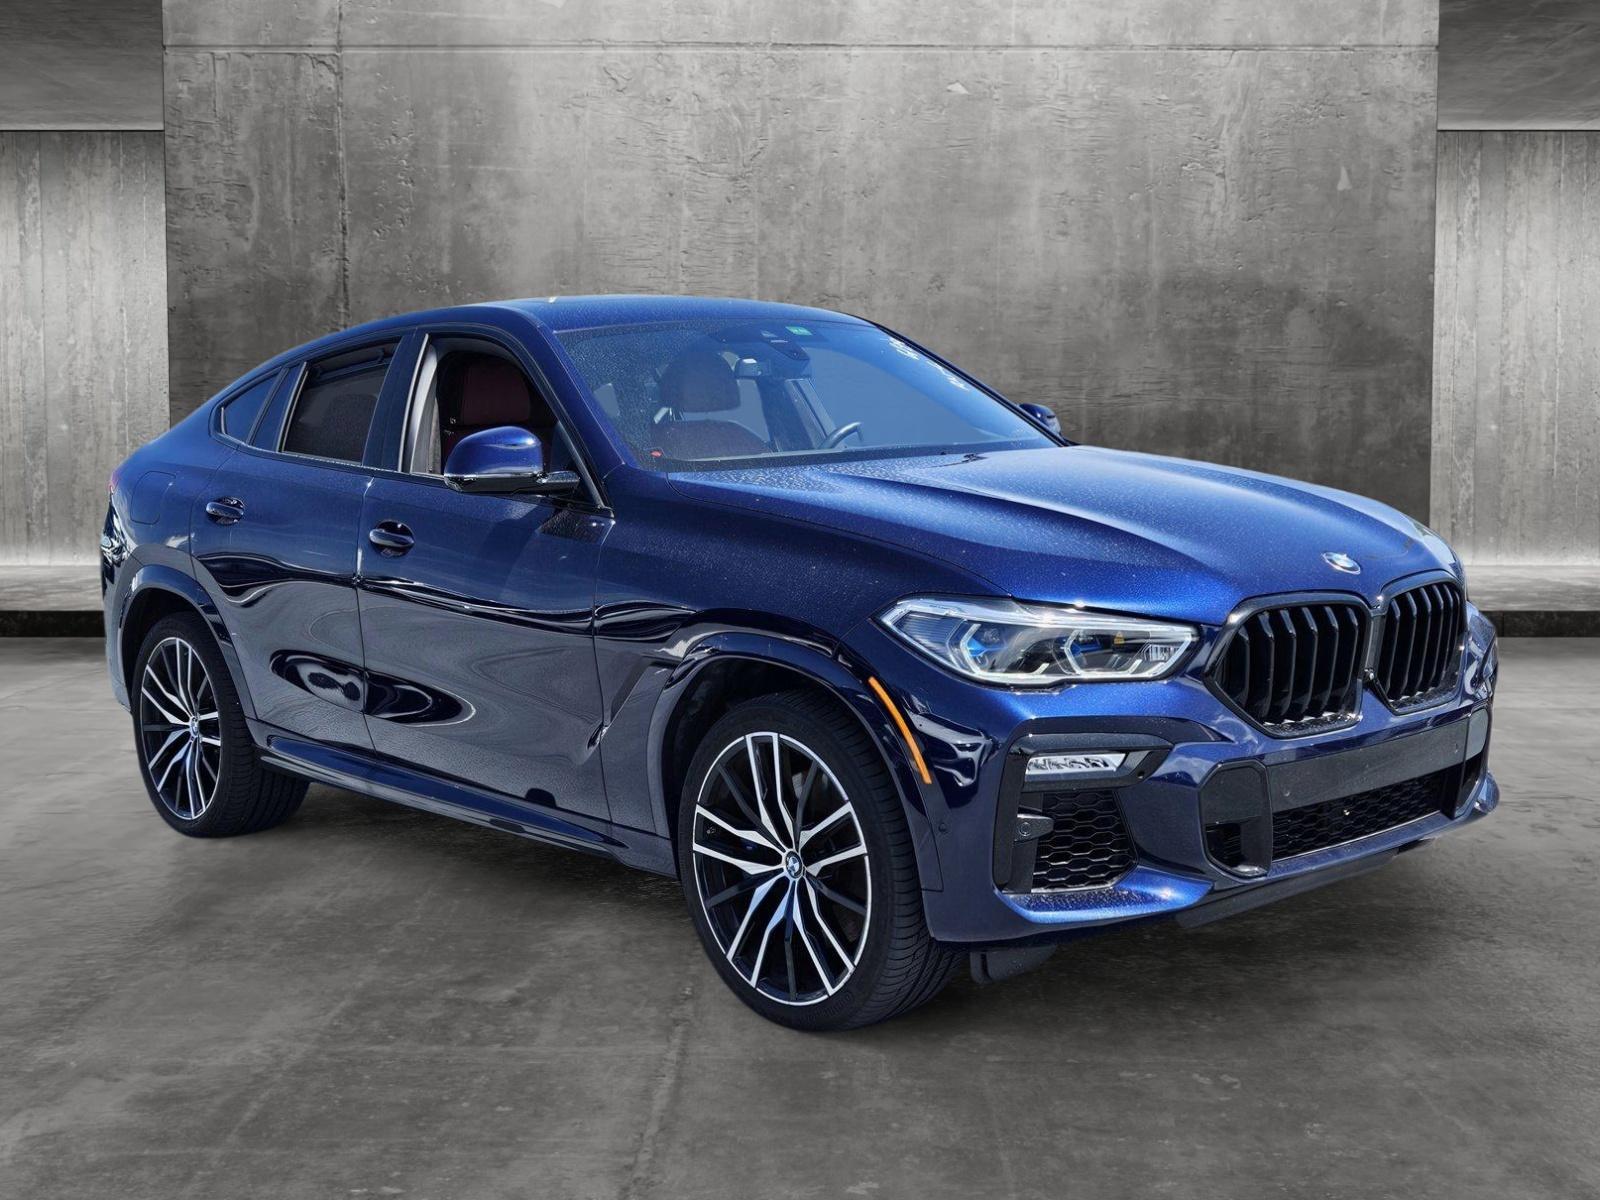 2021 BMW X6 M50i Vehicle Photo in Fort Lauderdale, FL 33316